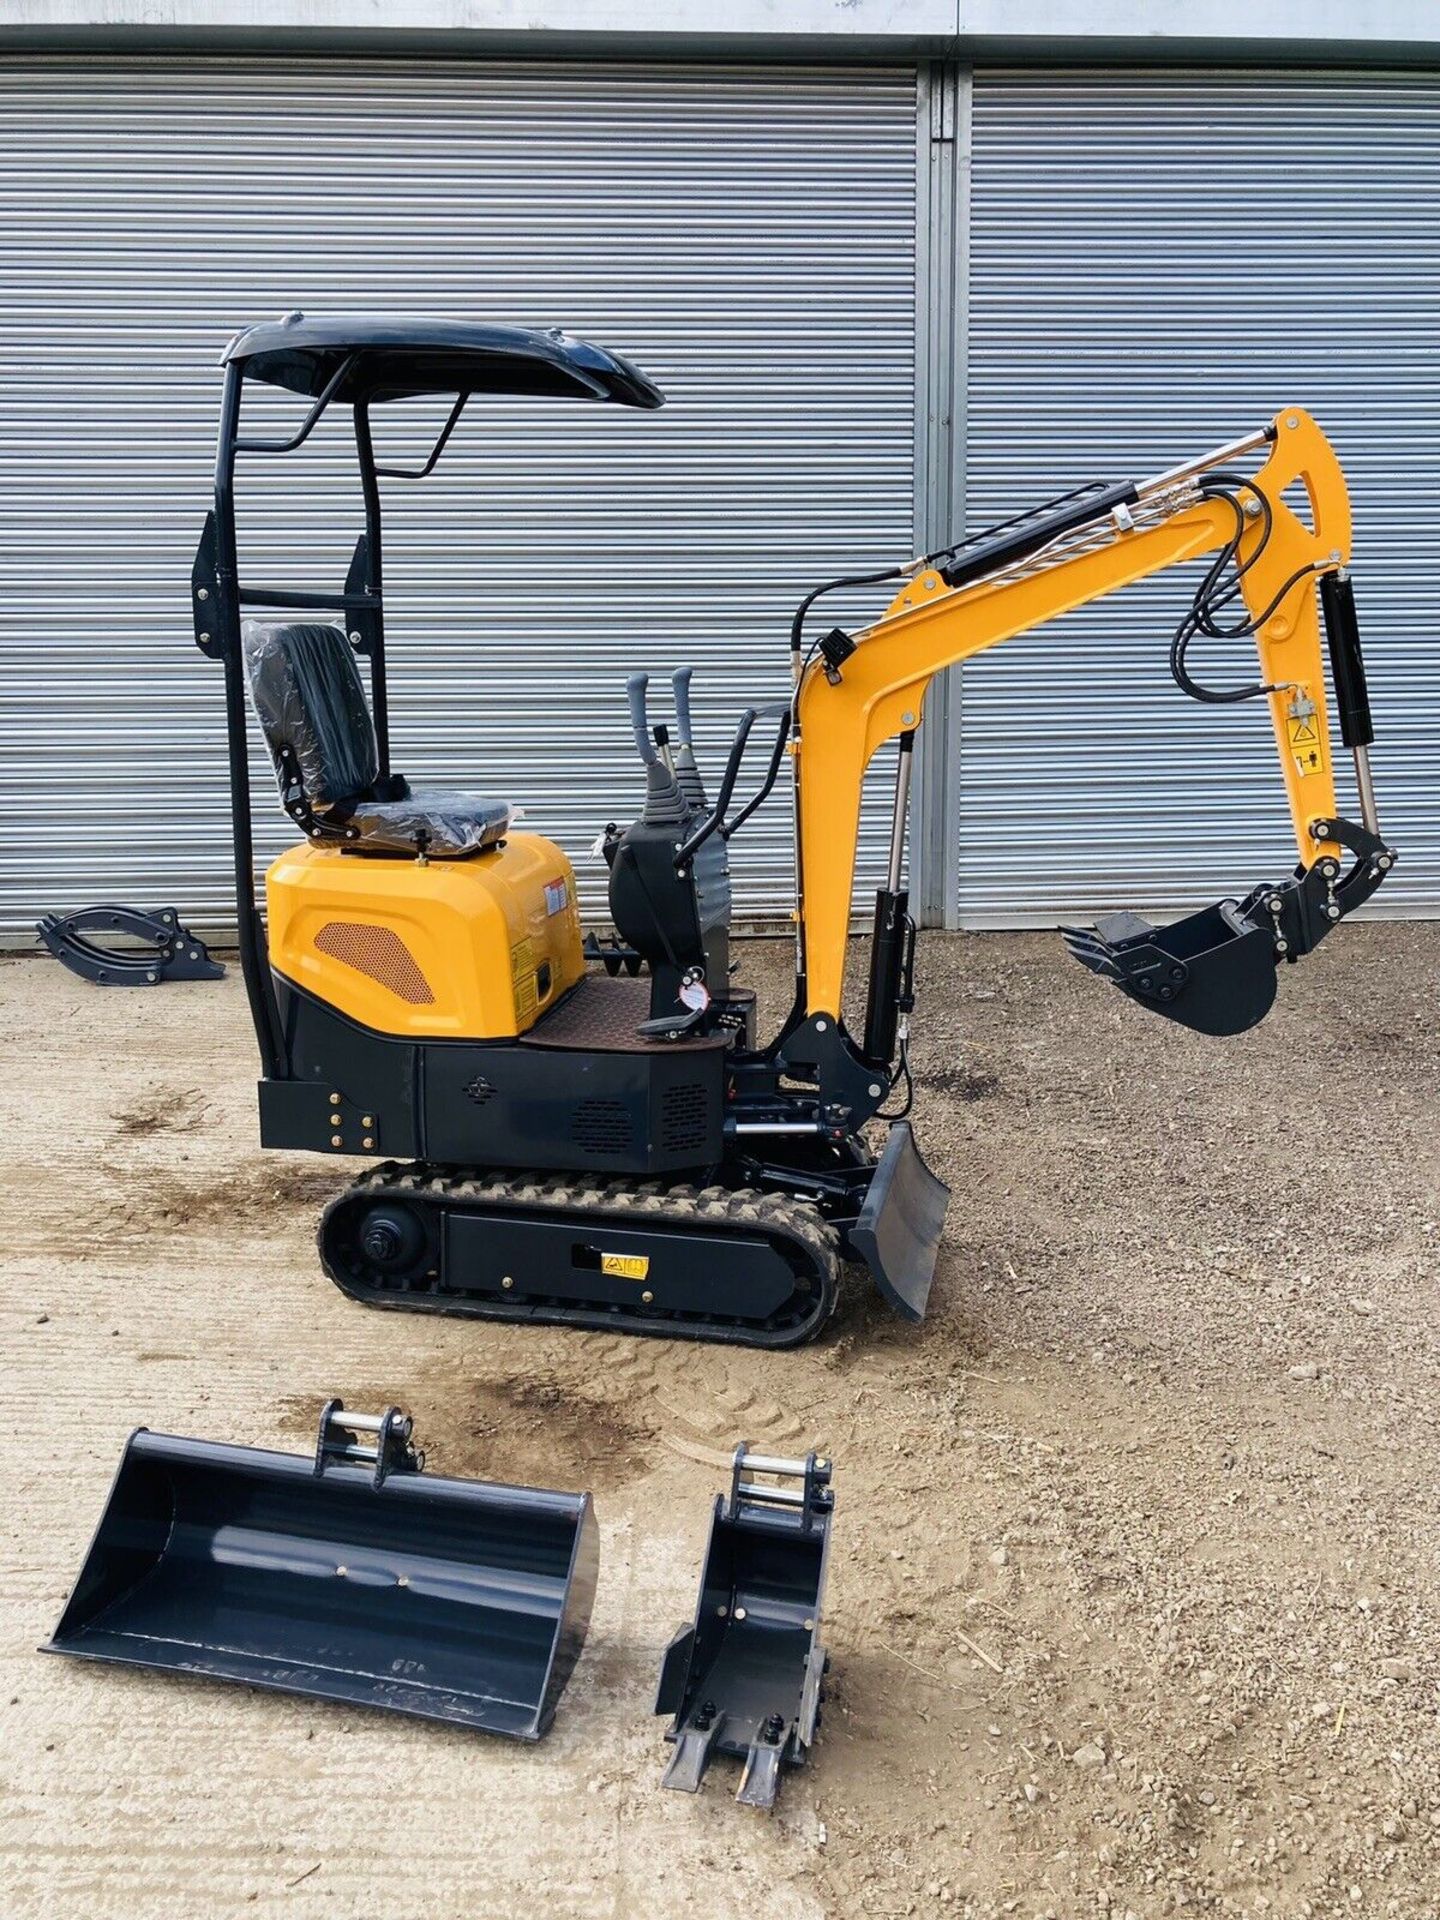 2023 POWER UNLEASHED: BRAND NEW 1 TONNE MICRO DIGGER - JCB, KUBOTA, AND MORE! - Image 2 of 12